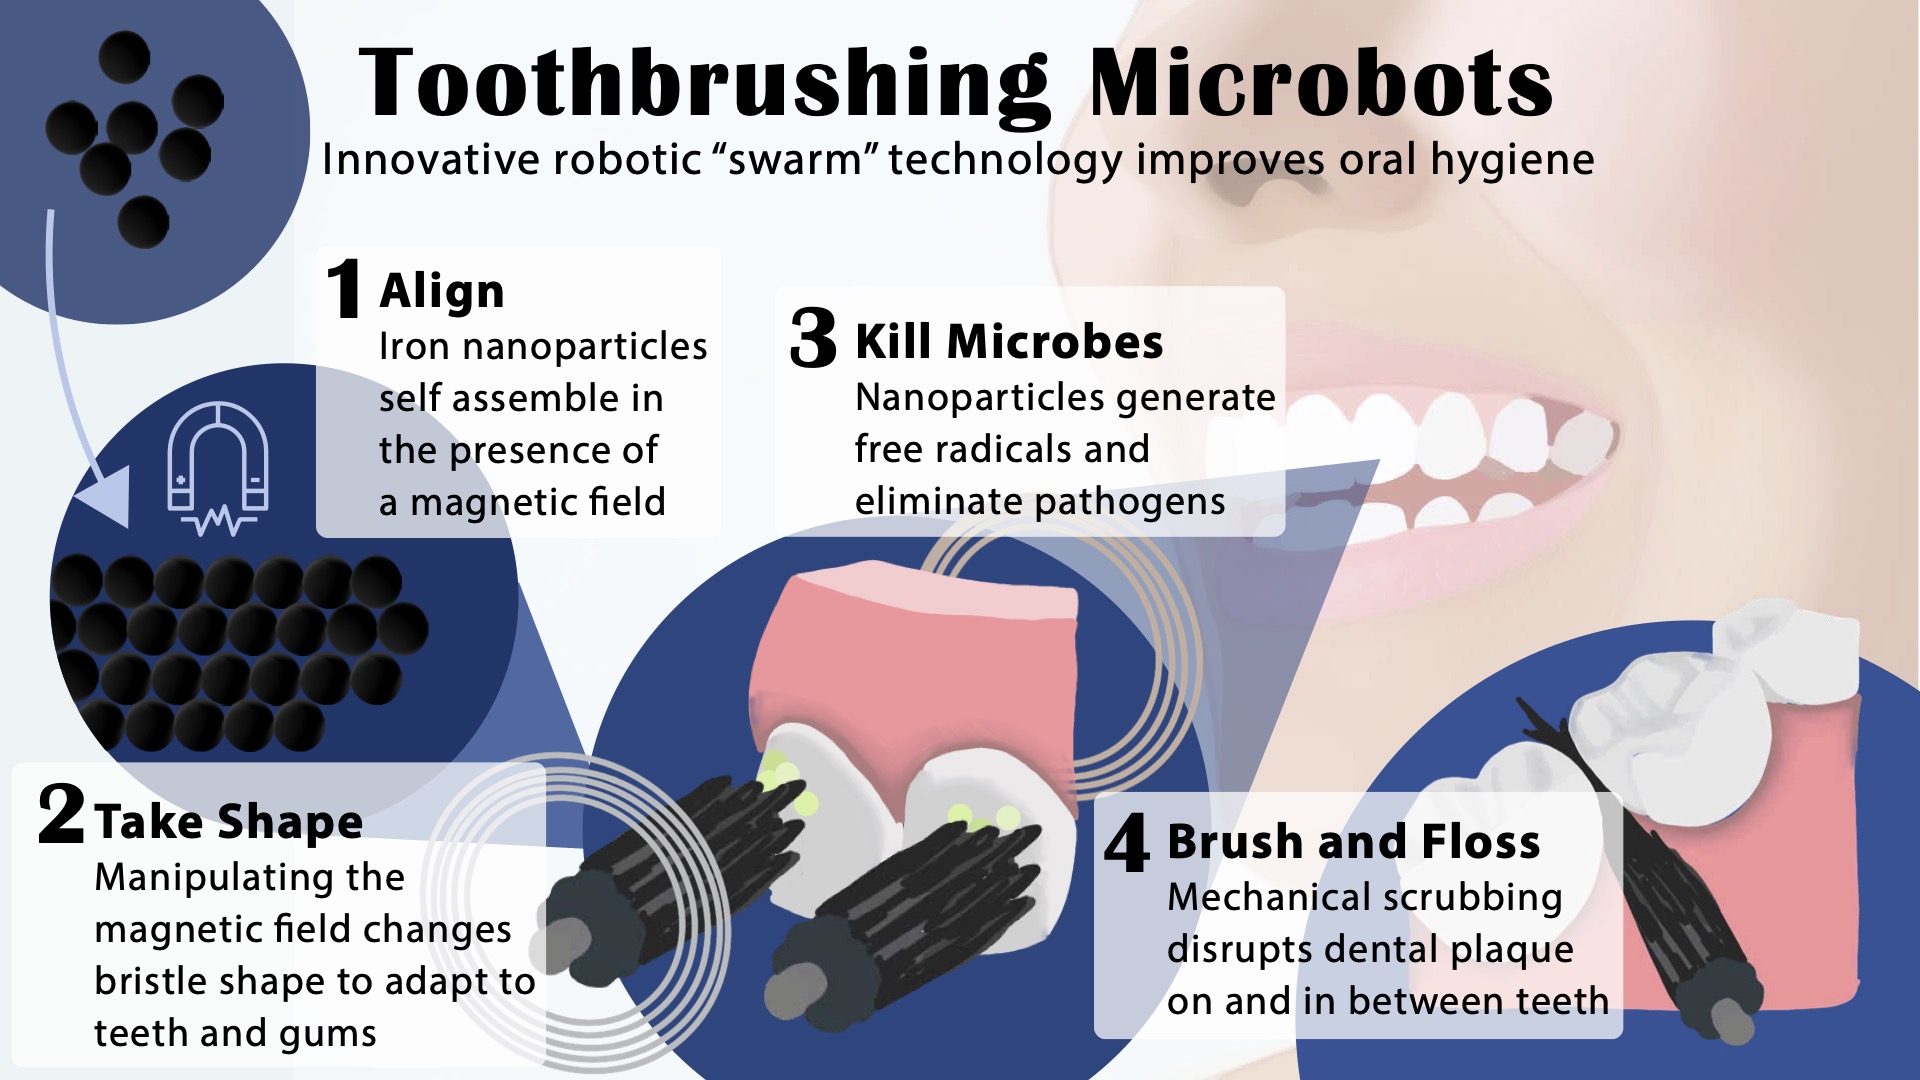 Image of smiling person using new technology to clean teeth: Toothbrushing Microrobots. Innovative robotic "swarm" technology improves oral hygiene. step one is align. Step two is take shape. Step three is kill microbes. Step four is brush and floss